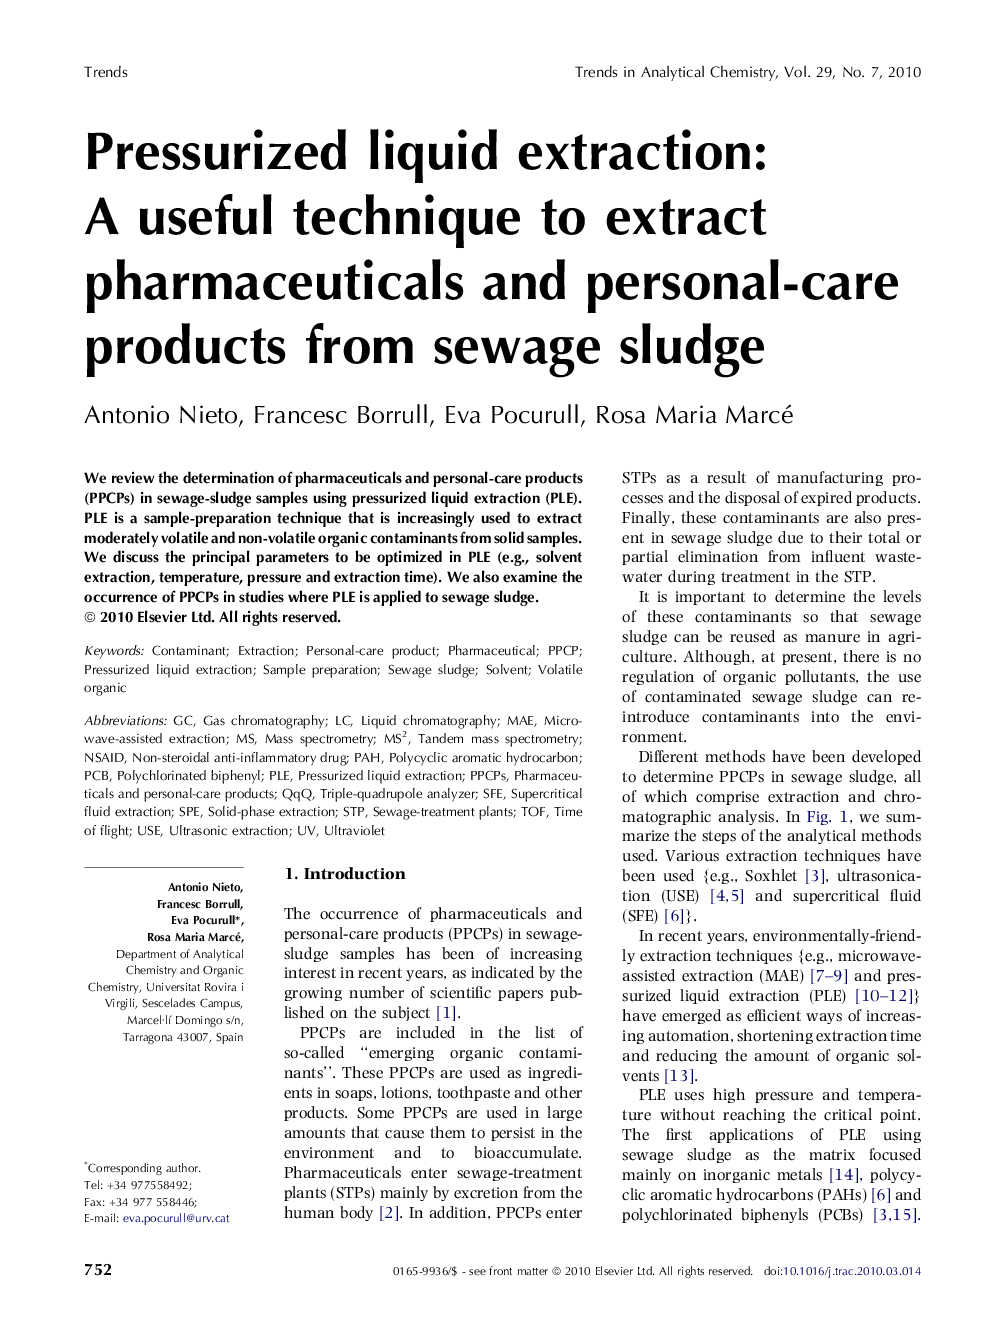 Pressurized liquid extraction: A useful technique to extract pharmaceuticals and personal-care products from sewage sludge